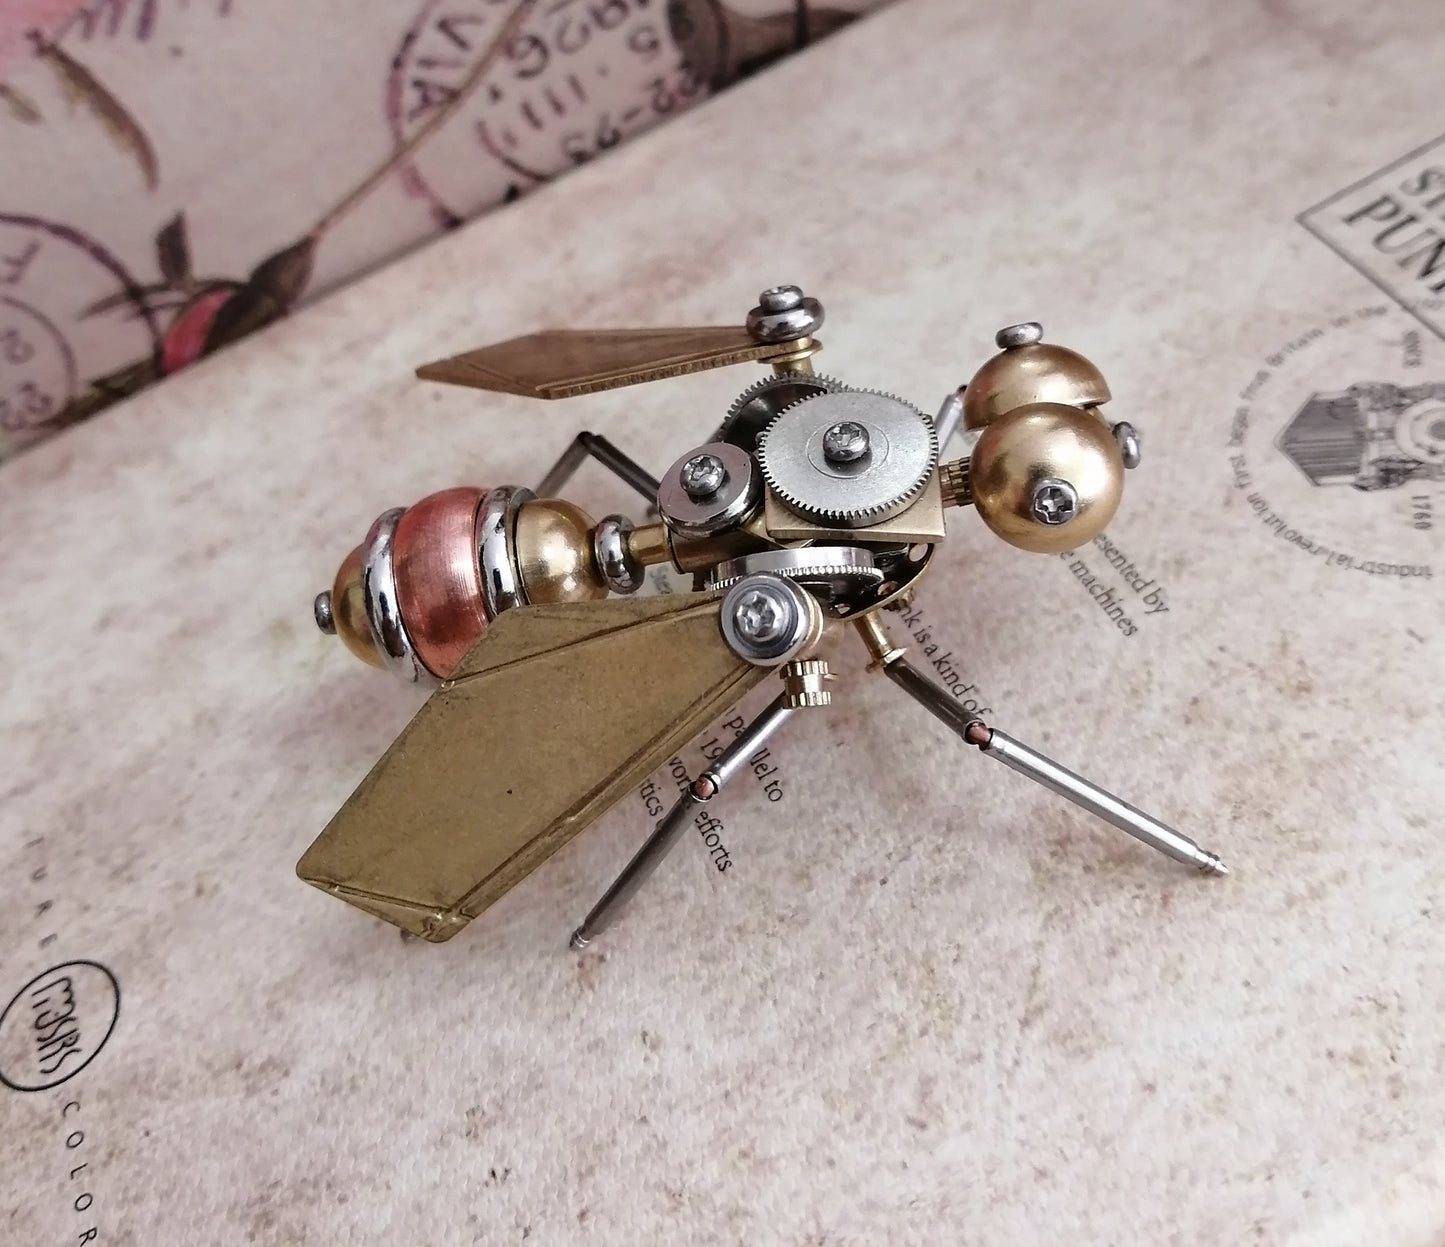 A Maramalive™ steampunk metal fly crafts sitting on top of a book.